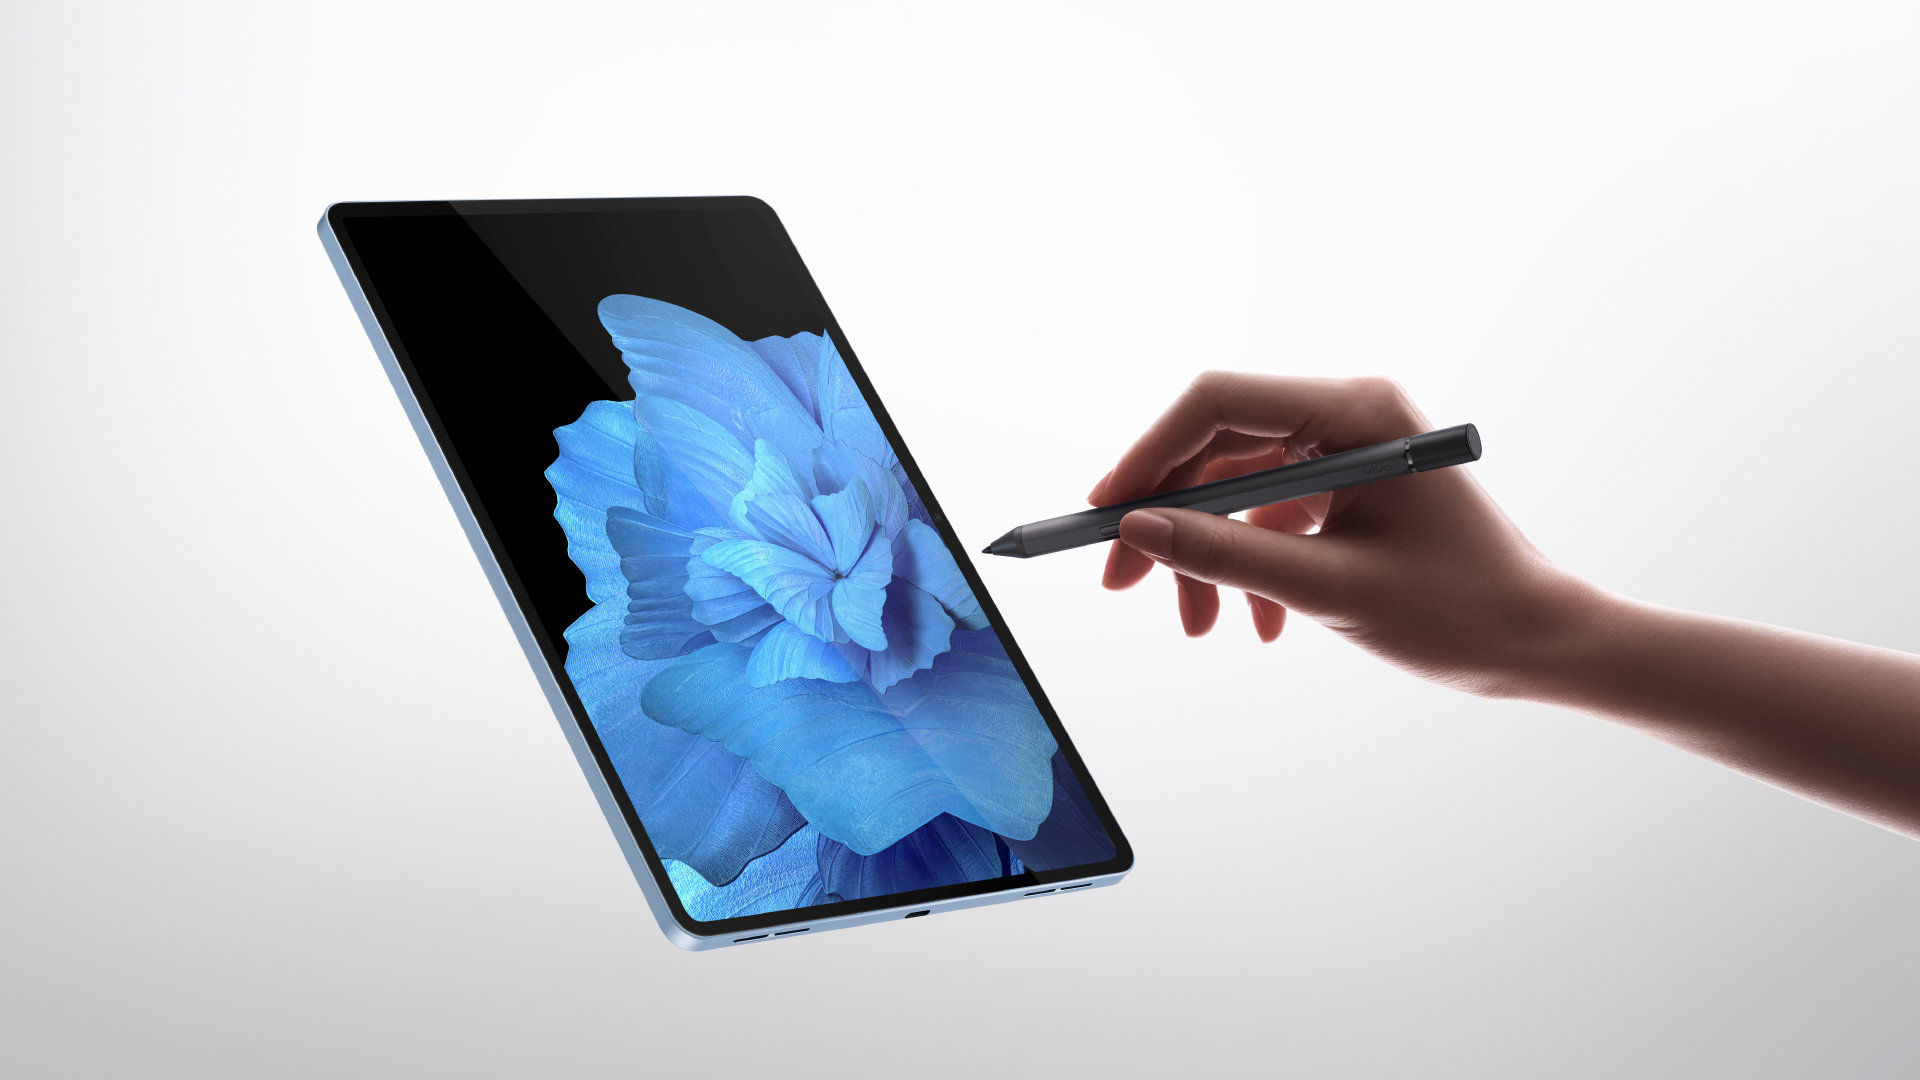 Vivo Pad Design Teased Officially Ahead of Launch Date Announcement on March 28 - MySmartPrice